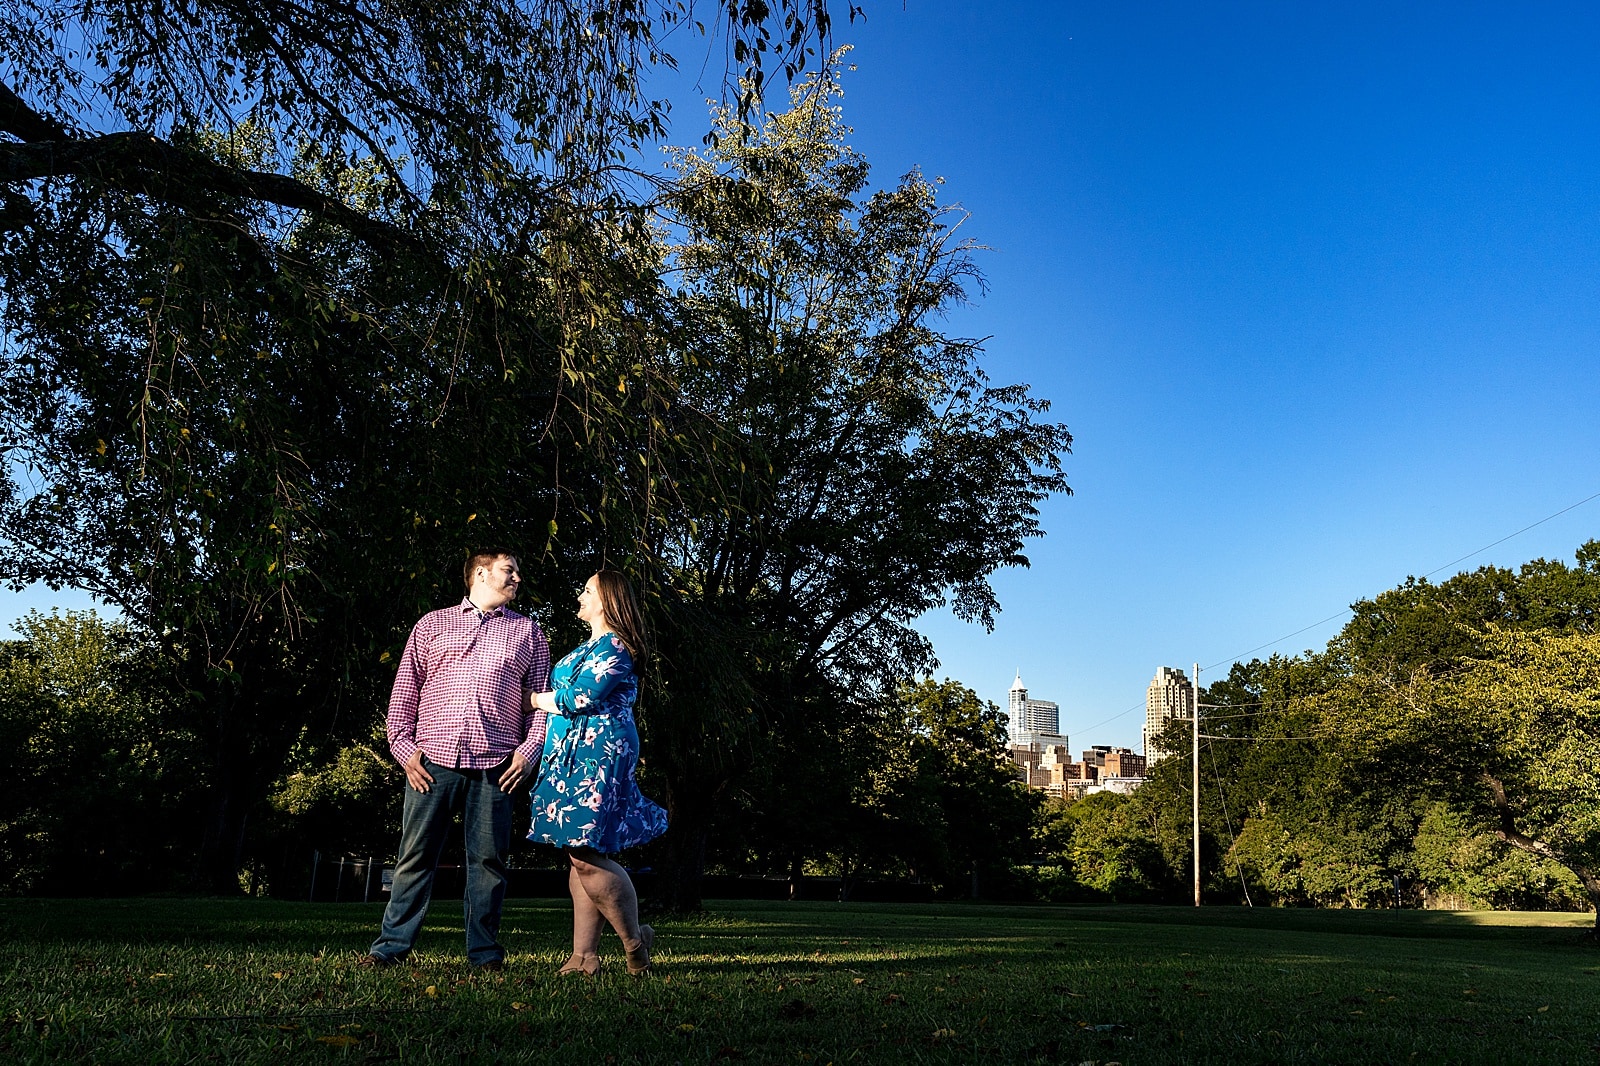 Dix Park is a great Raleigh engagement location